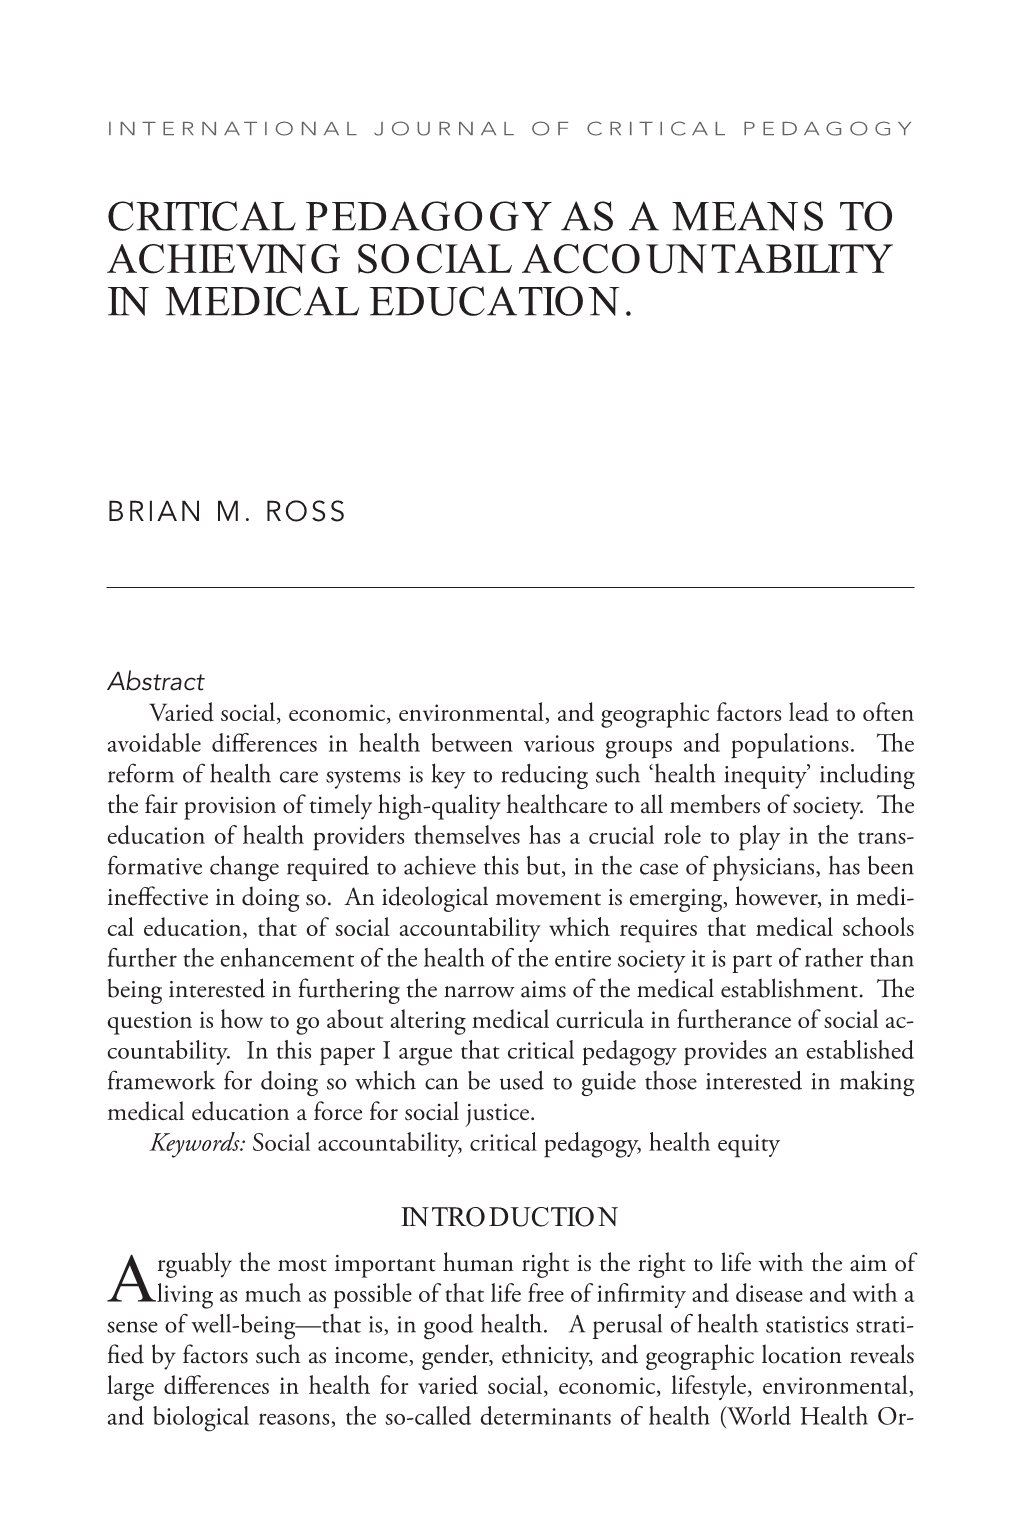 Critical Pedagogy As a Means to Achieving Social Accountability in Medical Education